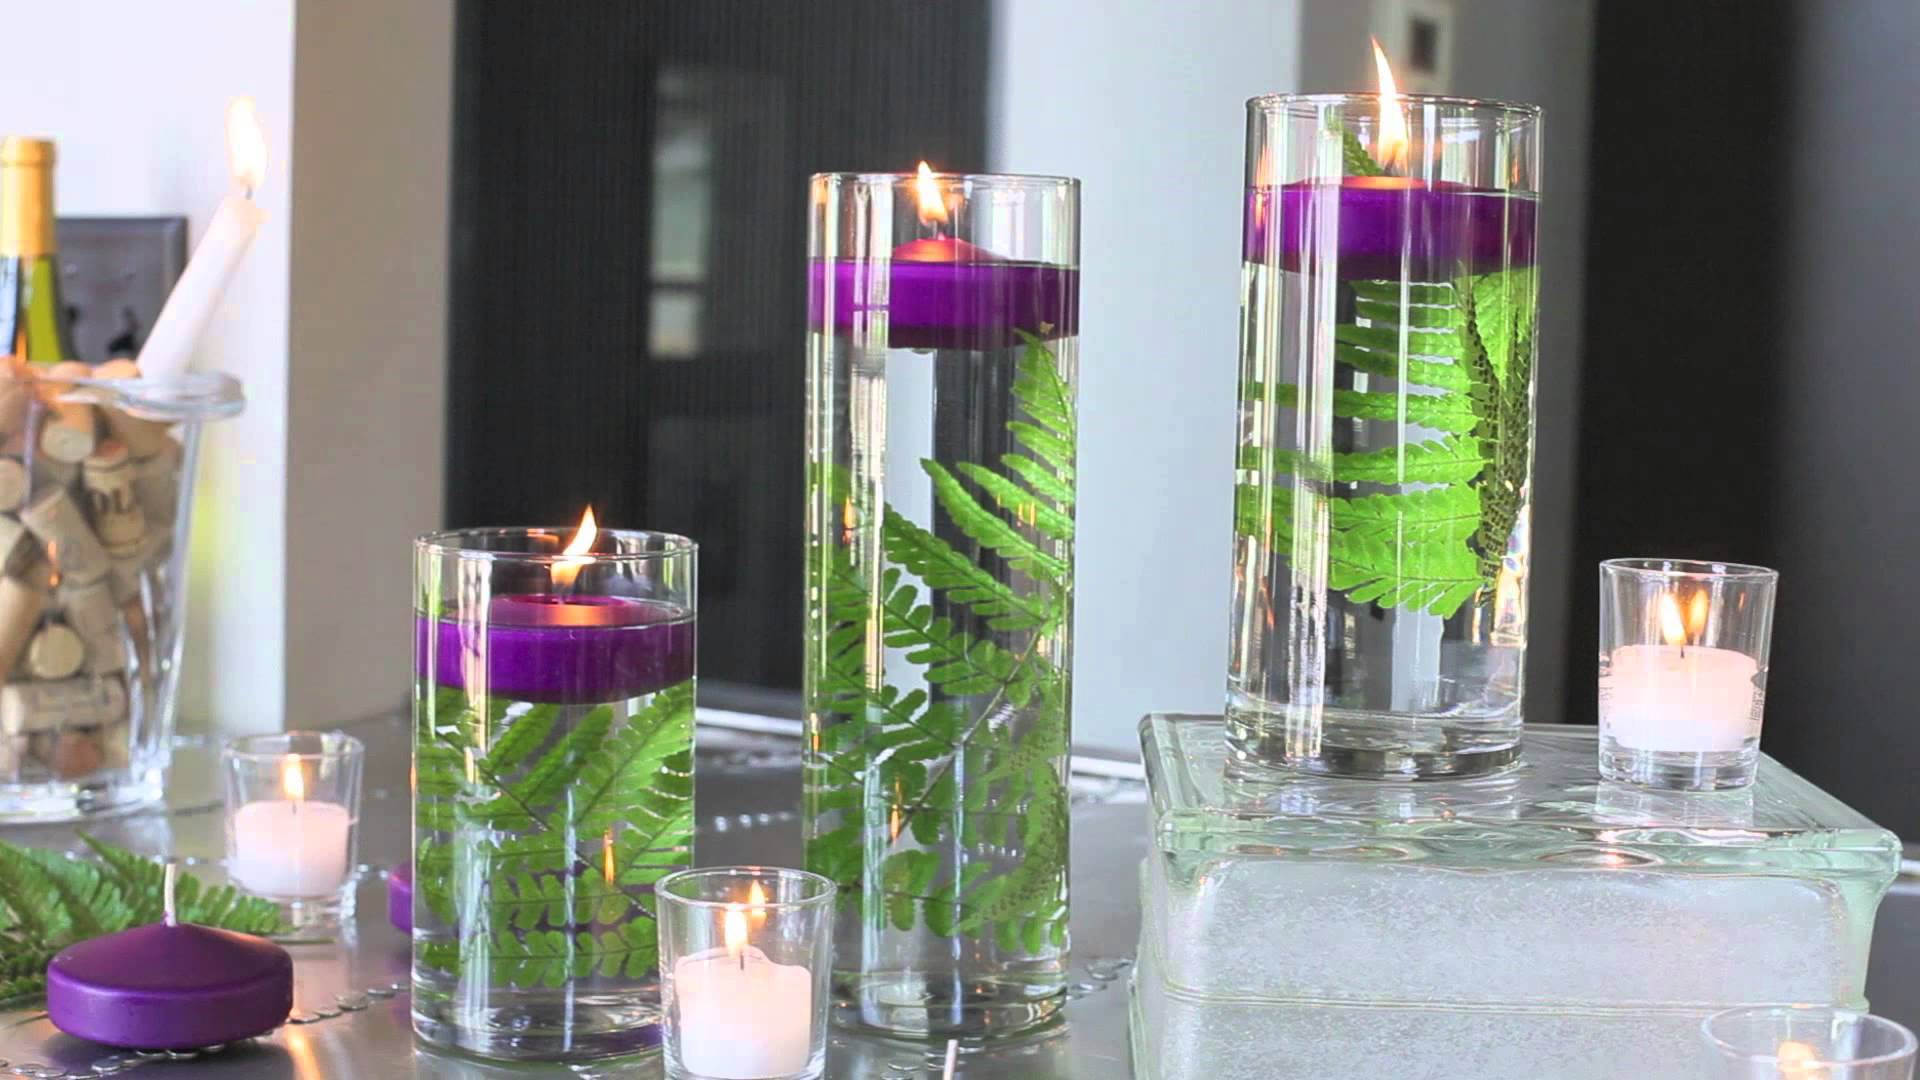 DIY Ideas: Spruce Up Your Space With Purple Floating Candles and Fern!!